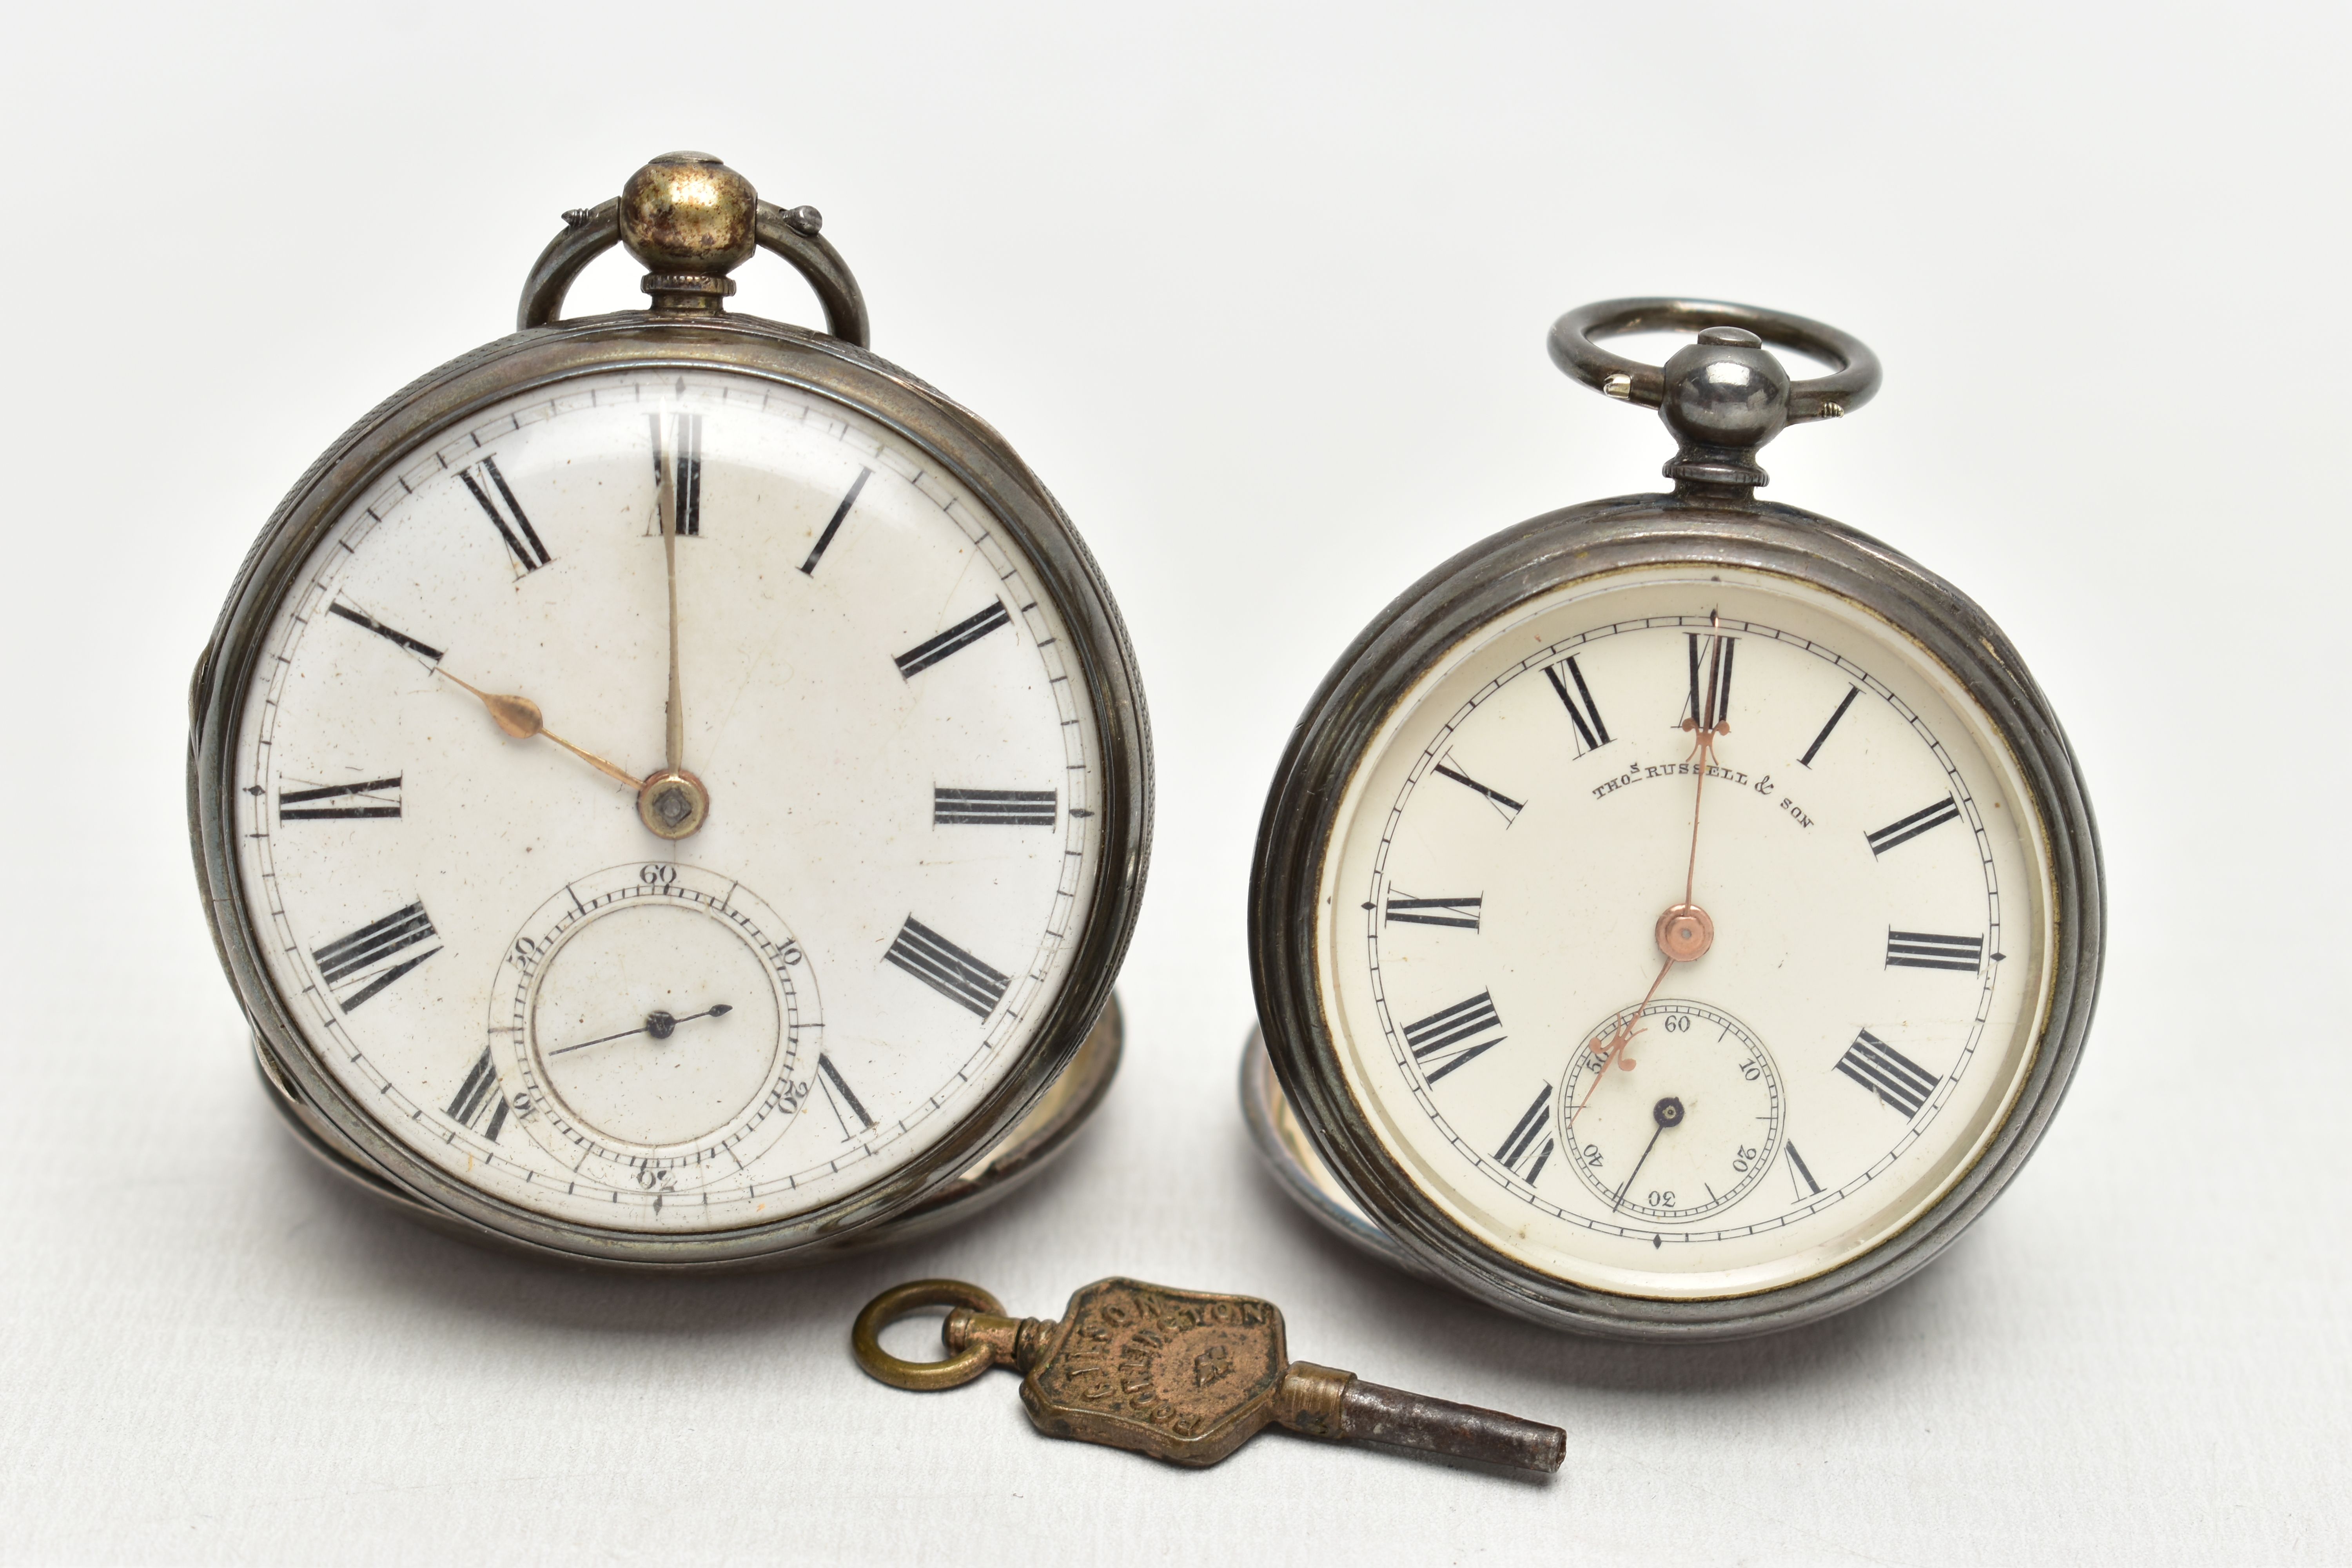 TWO OPEN FACE POCKET WATCHES AND WATCH KEY, the first a silver open face pocket watch, key wound,